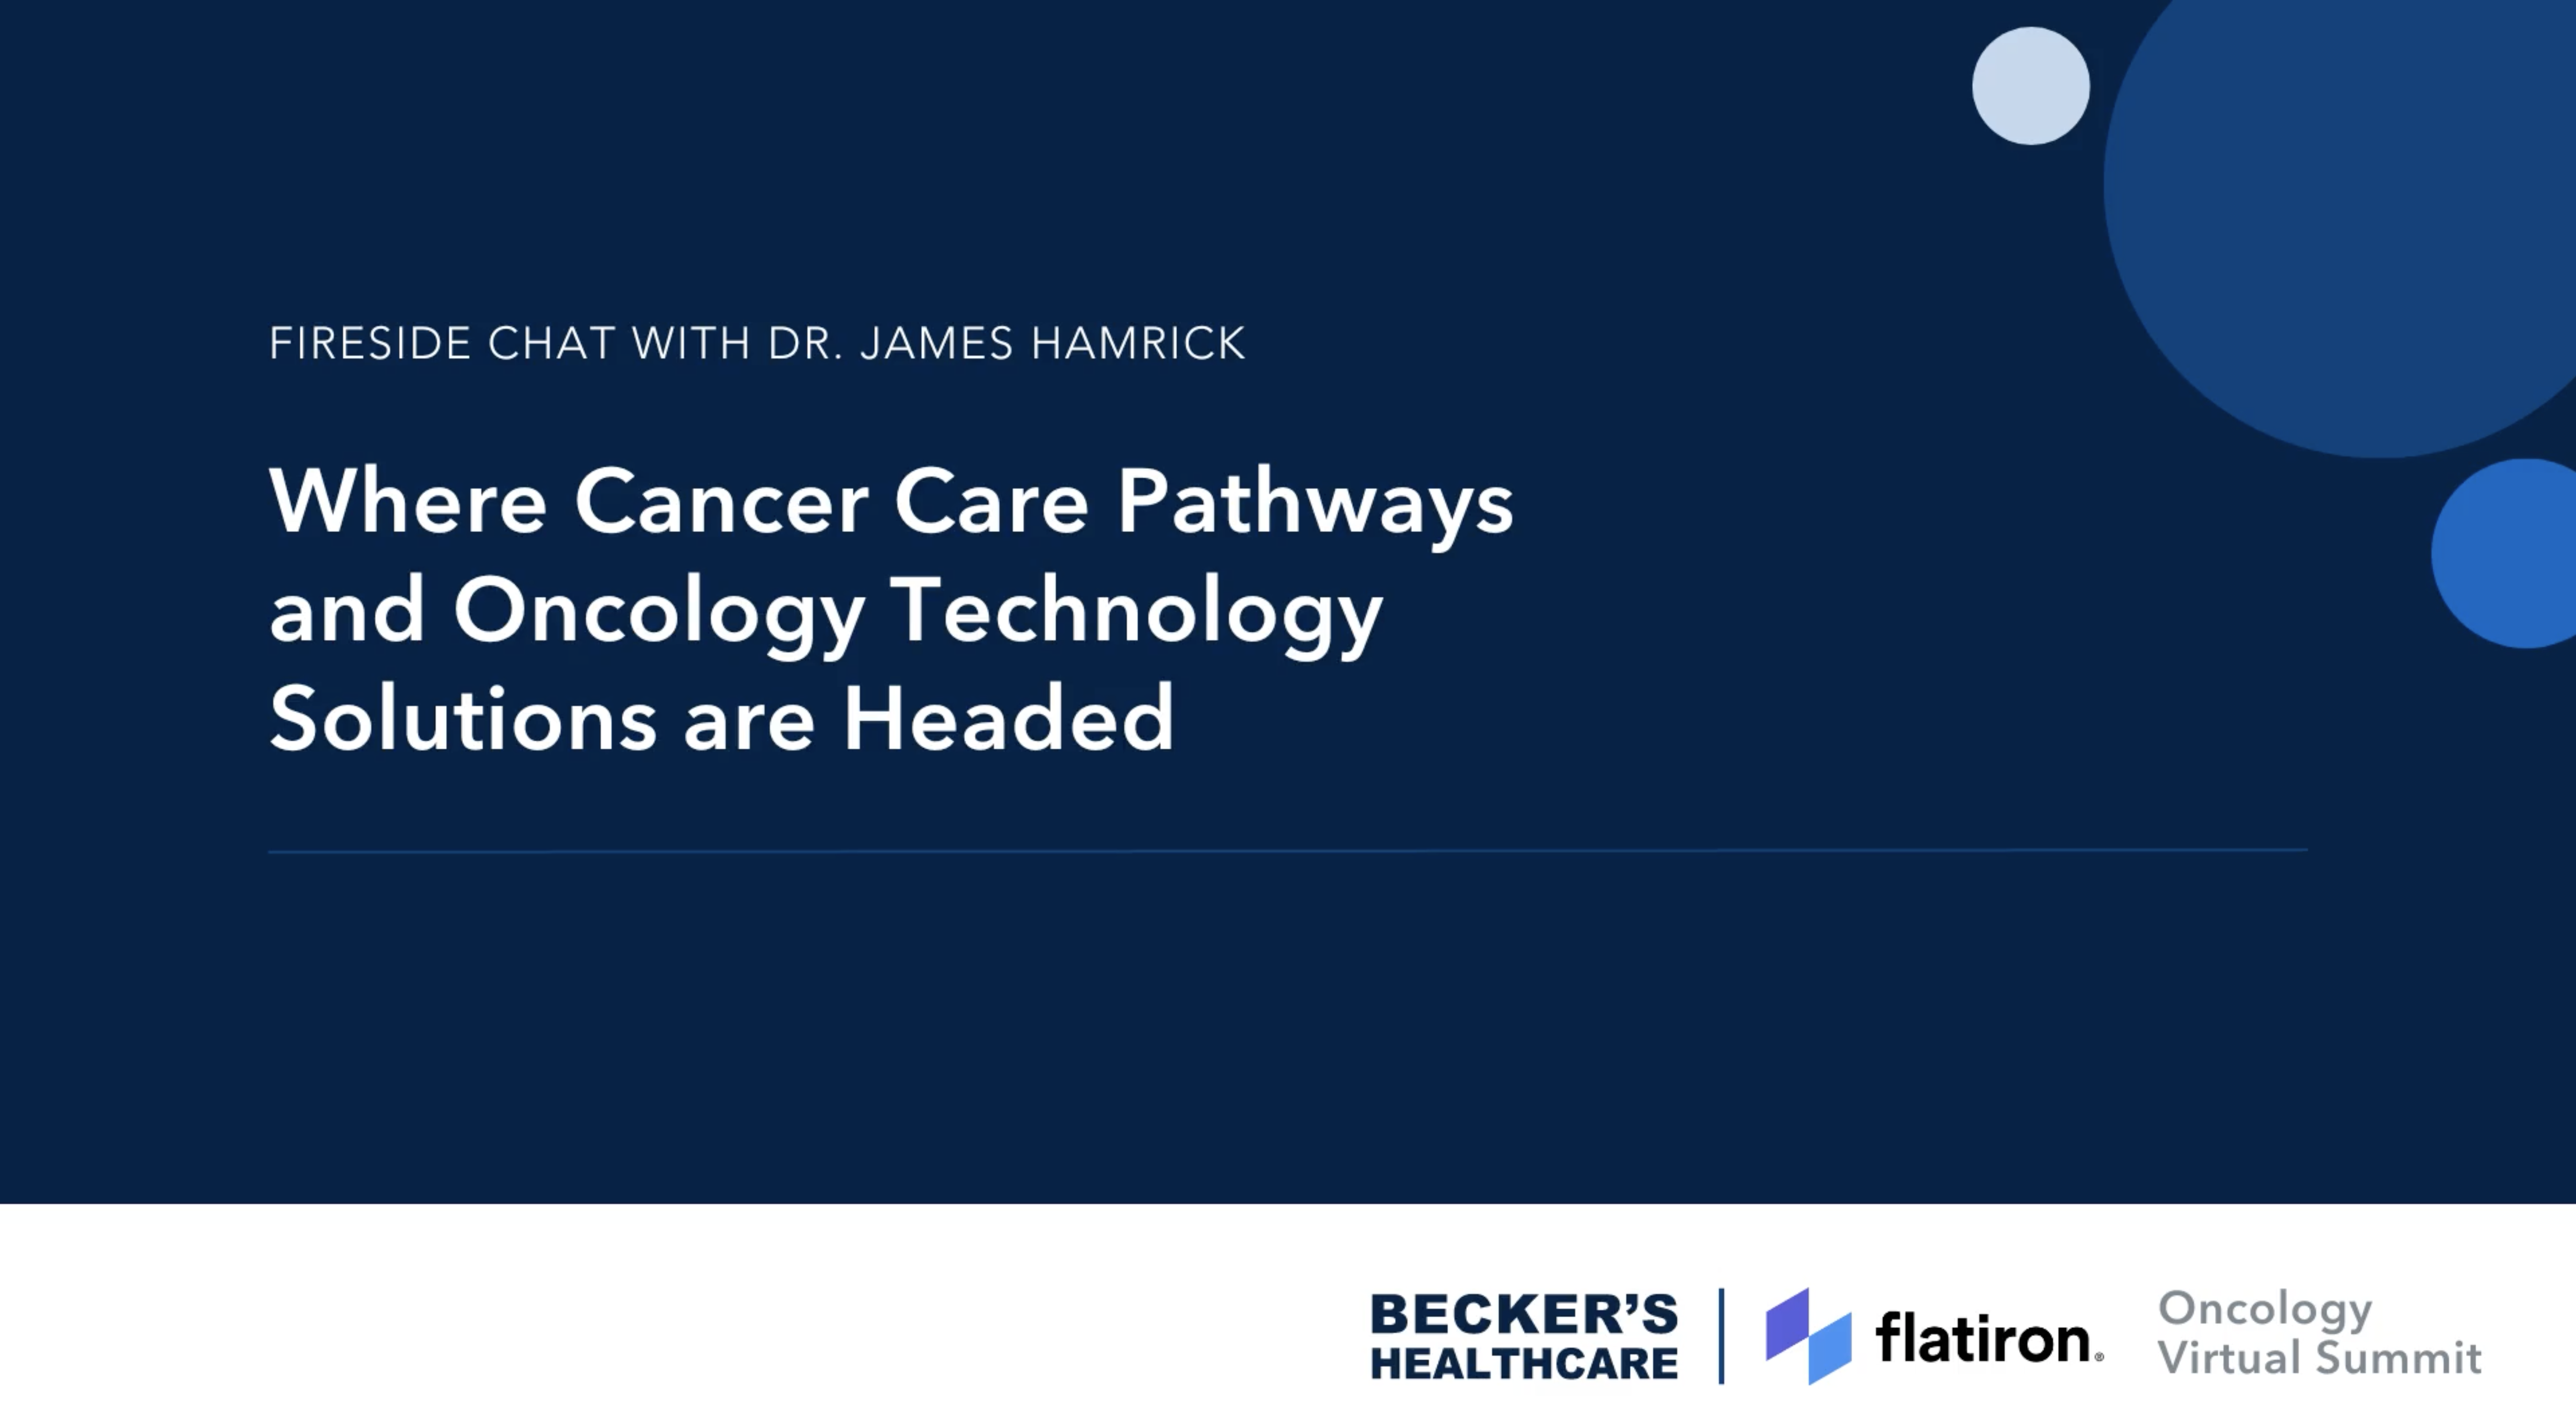 Fireside Chat: Where Cancer Care Pathways and Oncology Technology Solutions are Headed